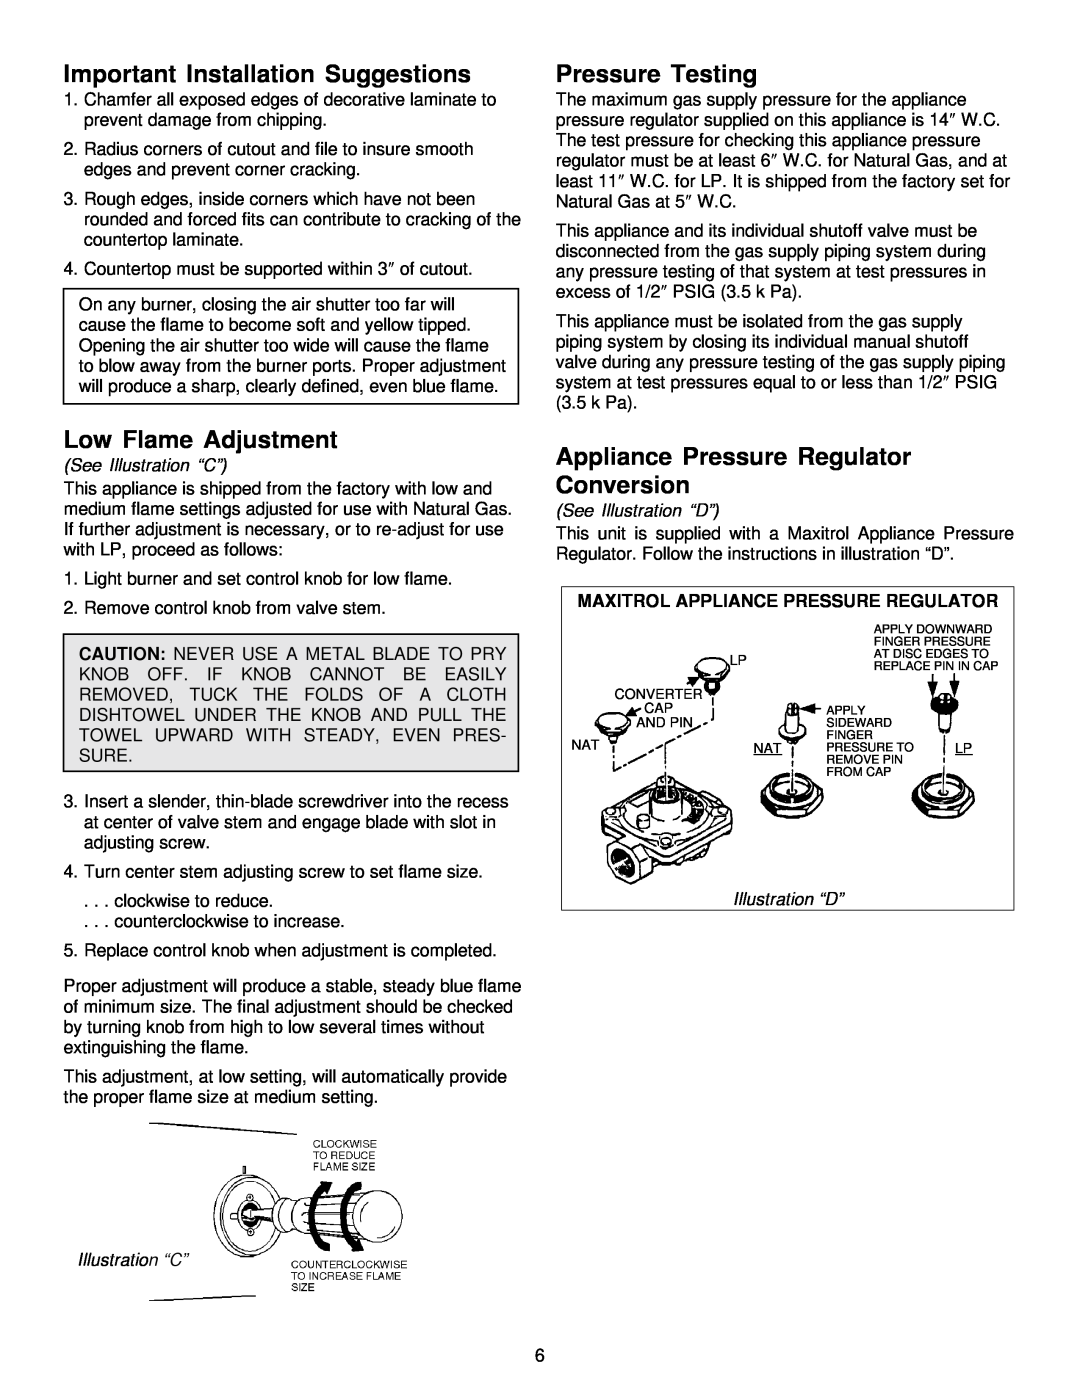 Jenn-Air JGD8348CDP Important Installation Suggestions, Low Flame Adjustment, Pressure Testing, See Illustration “C” 